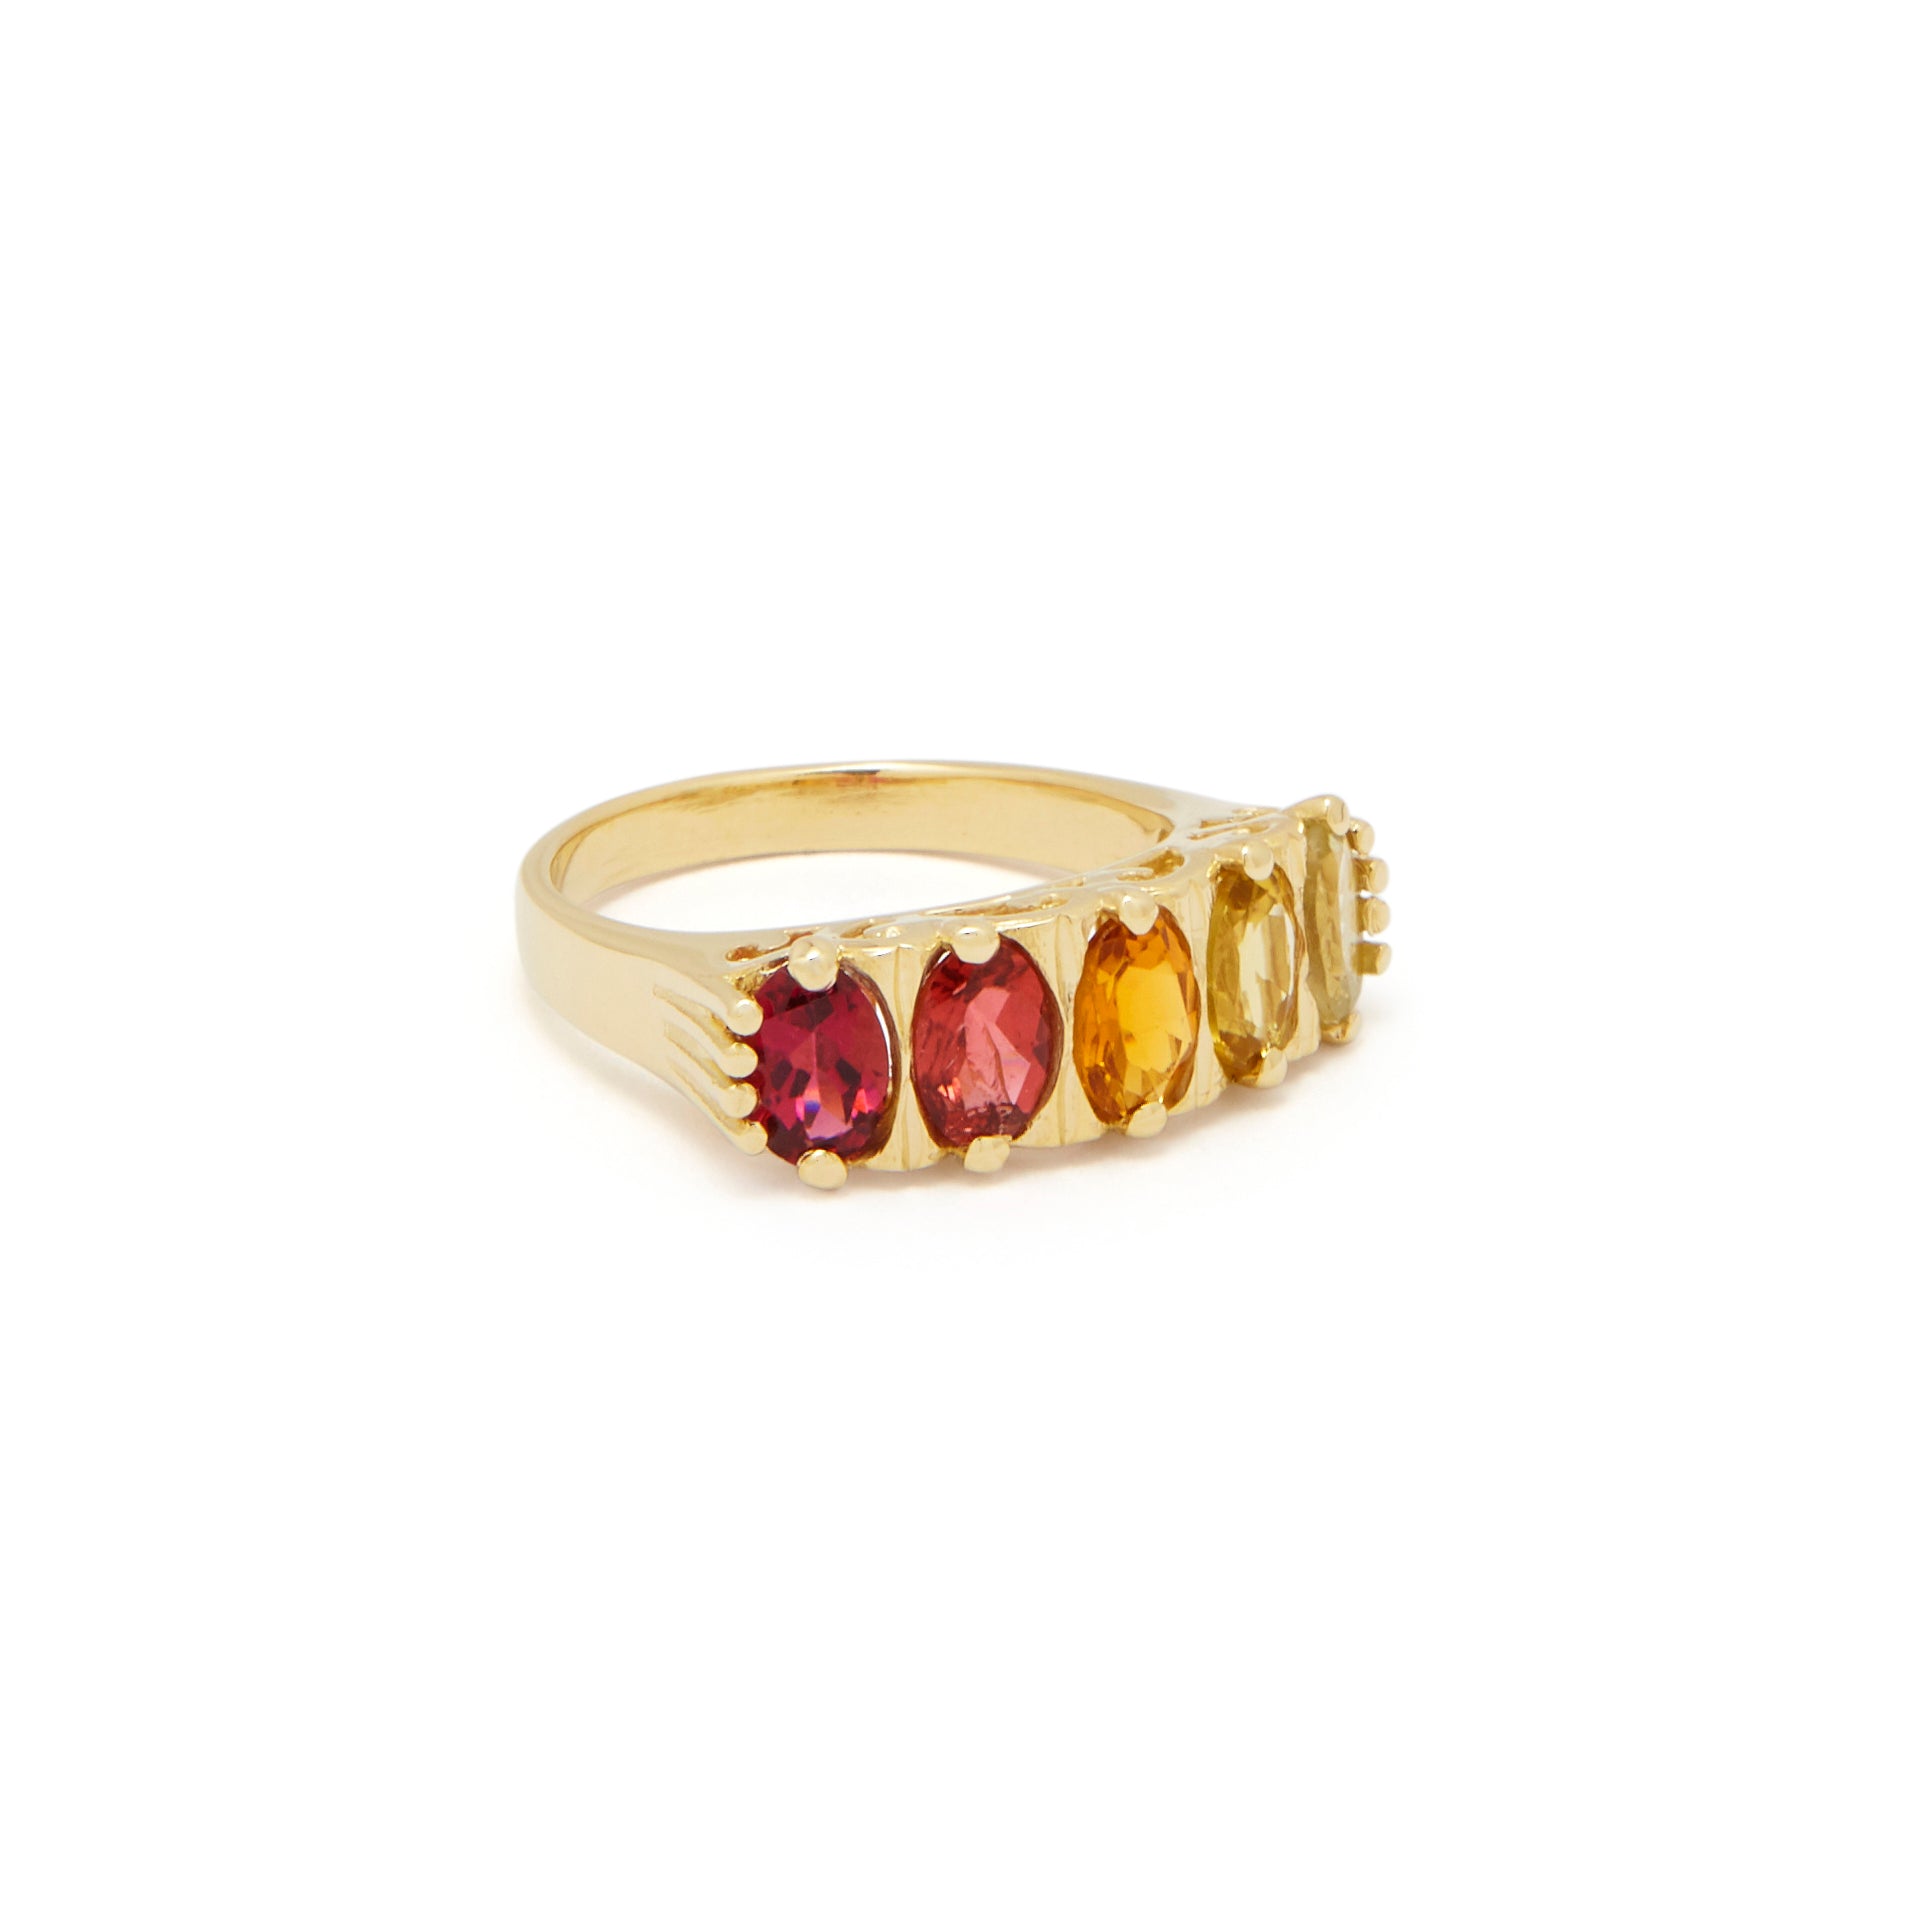 The F&B Sunset Ombre Ring